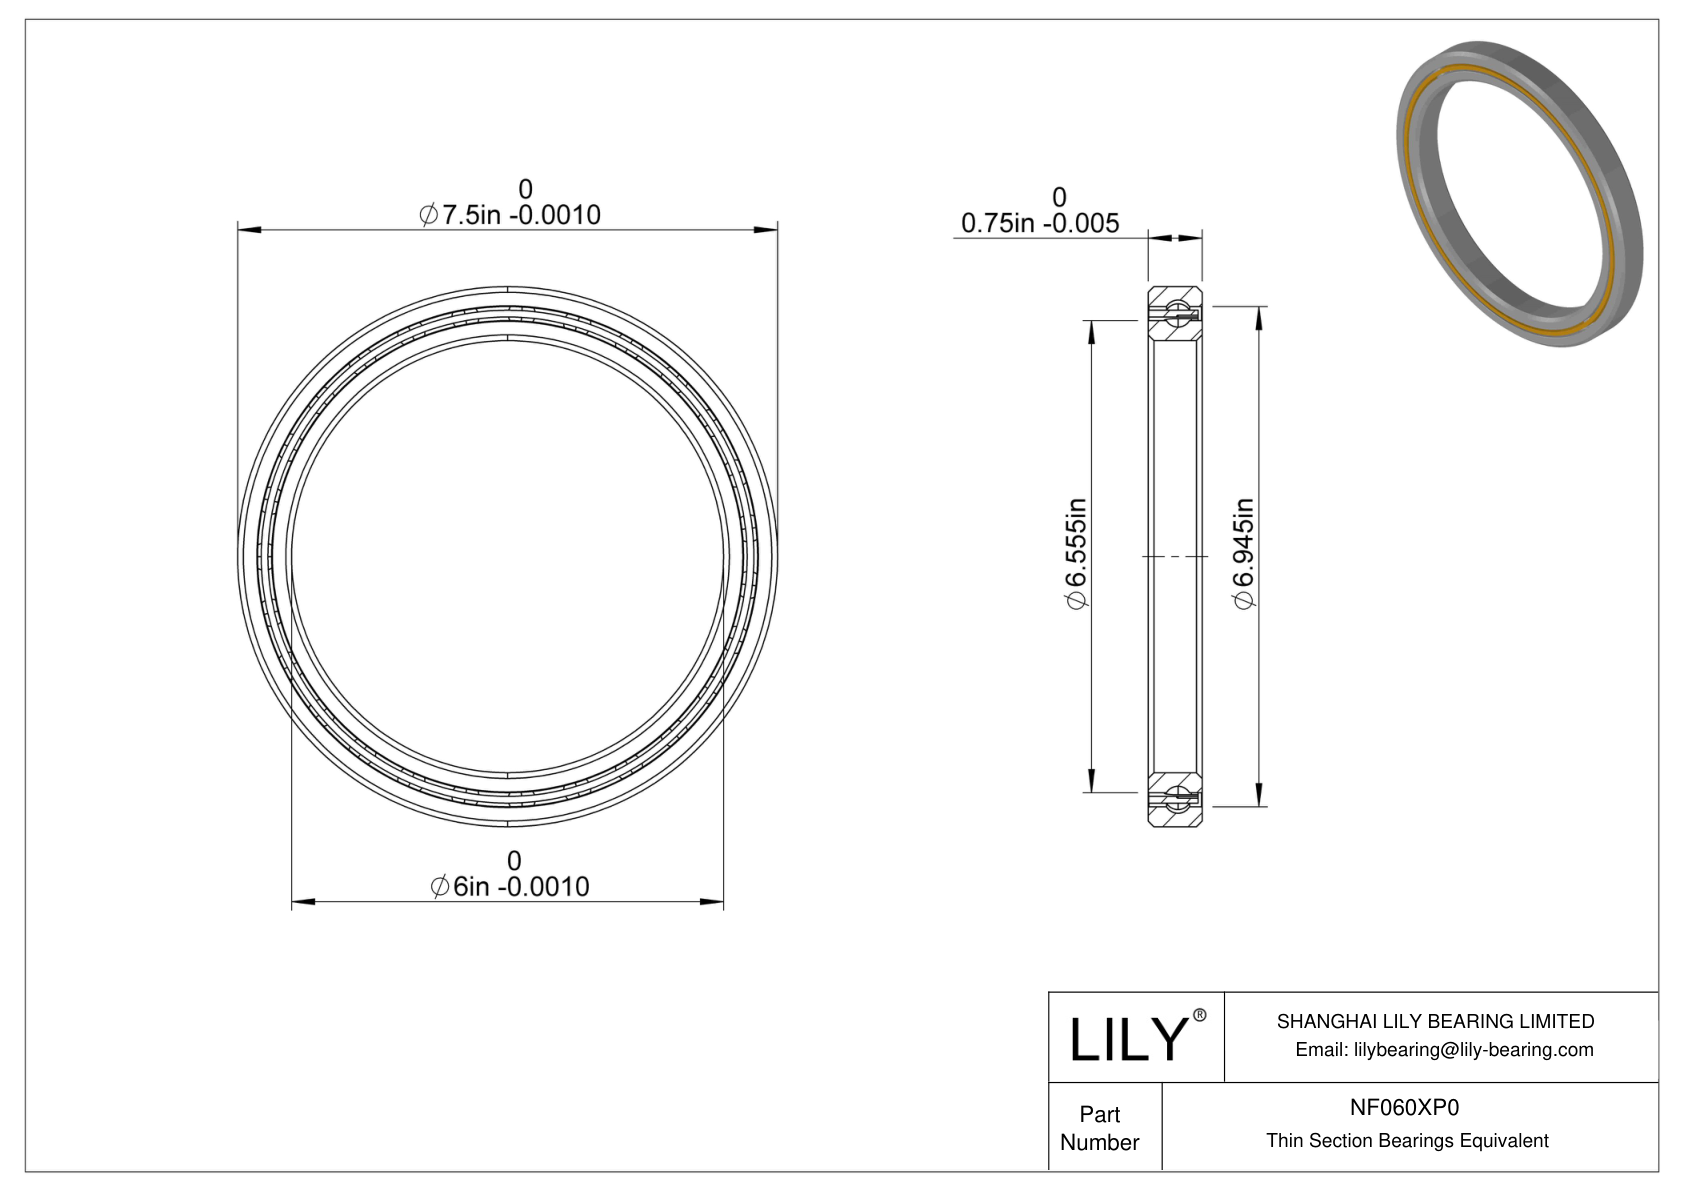 NF060XP0 Constant Section (CS) Bearings cad drawing